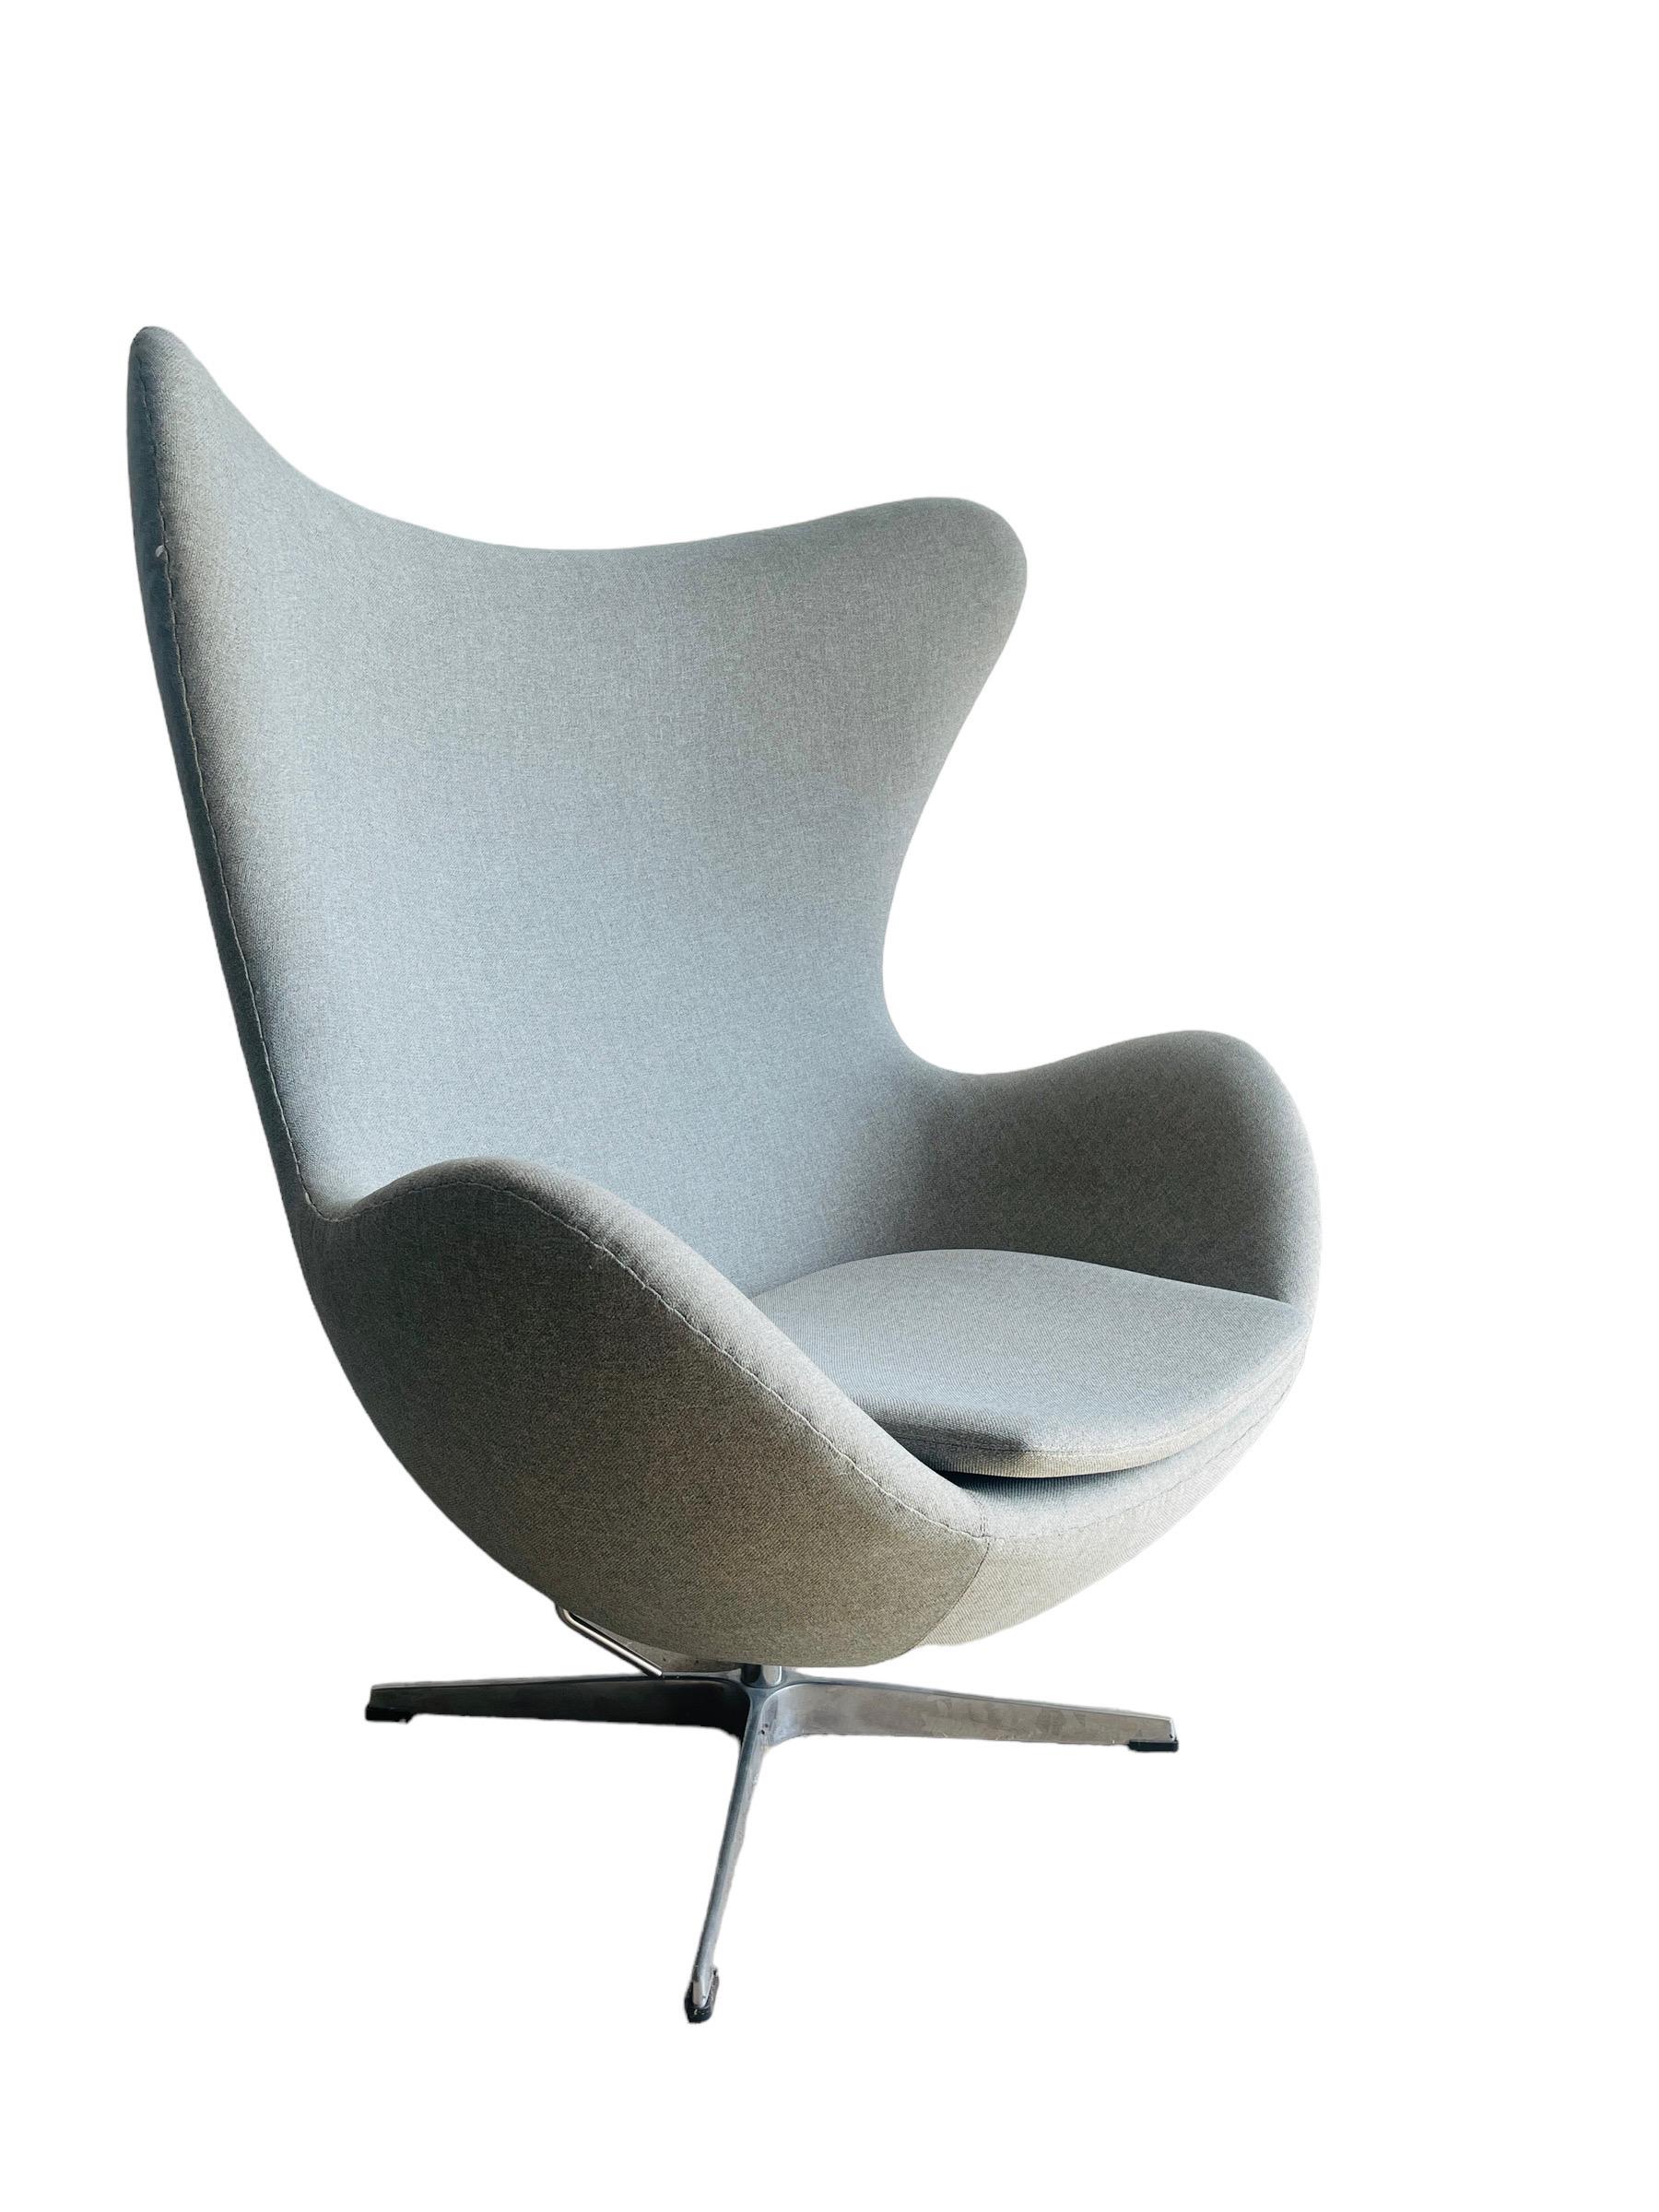 For sale is a pair of elegant modern Egg Chairs, exemplifying sleek design and comfort. These chairs are in excellent condition, free from rips, stains, or damages, making them a superb addition to any contemporary living space. Each chair measures